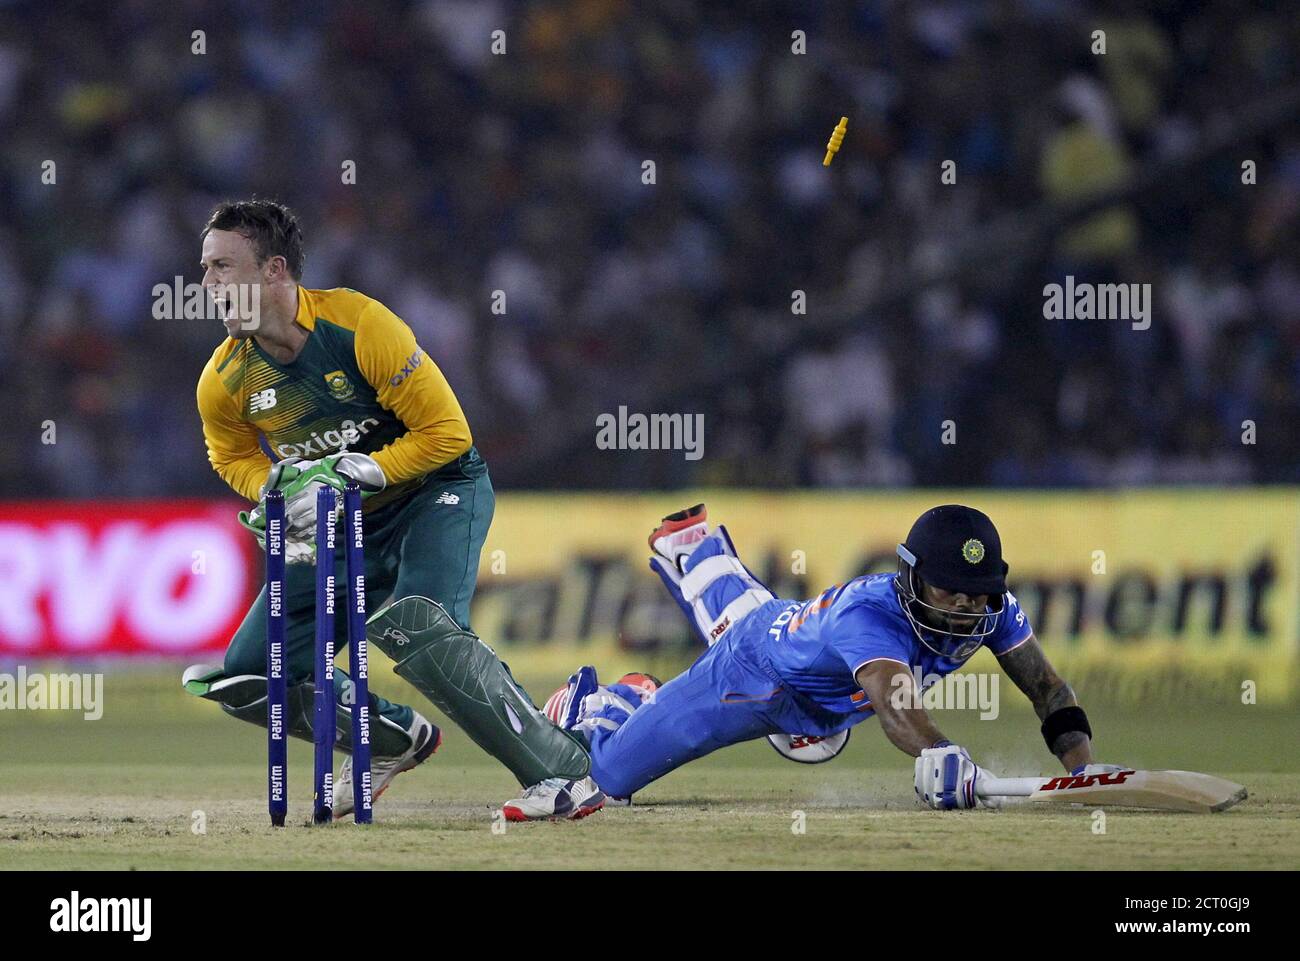 India's Virat Kohli dives to make the crease as he is run out by South Africa's AB de Villiers during their second Twenty20 cricket match in Cuttack, India, October 5, 2015. REUTERS/Danish Siddiqui Stock Photo